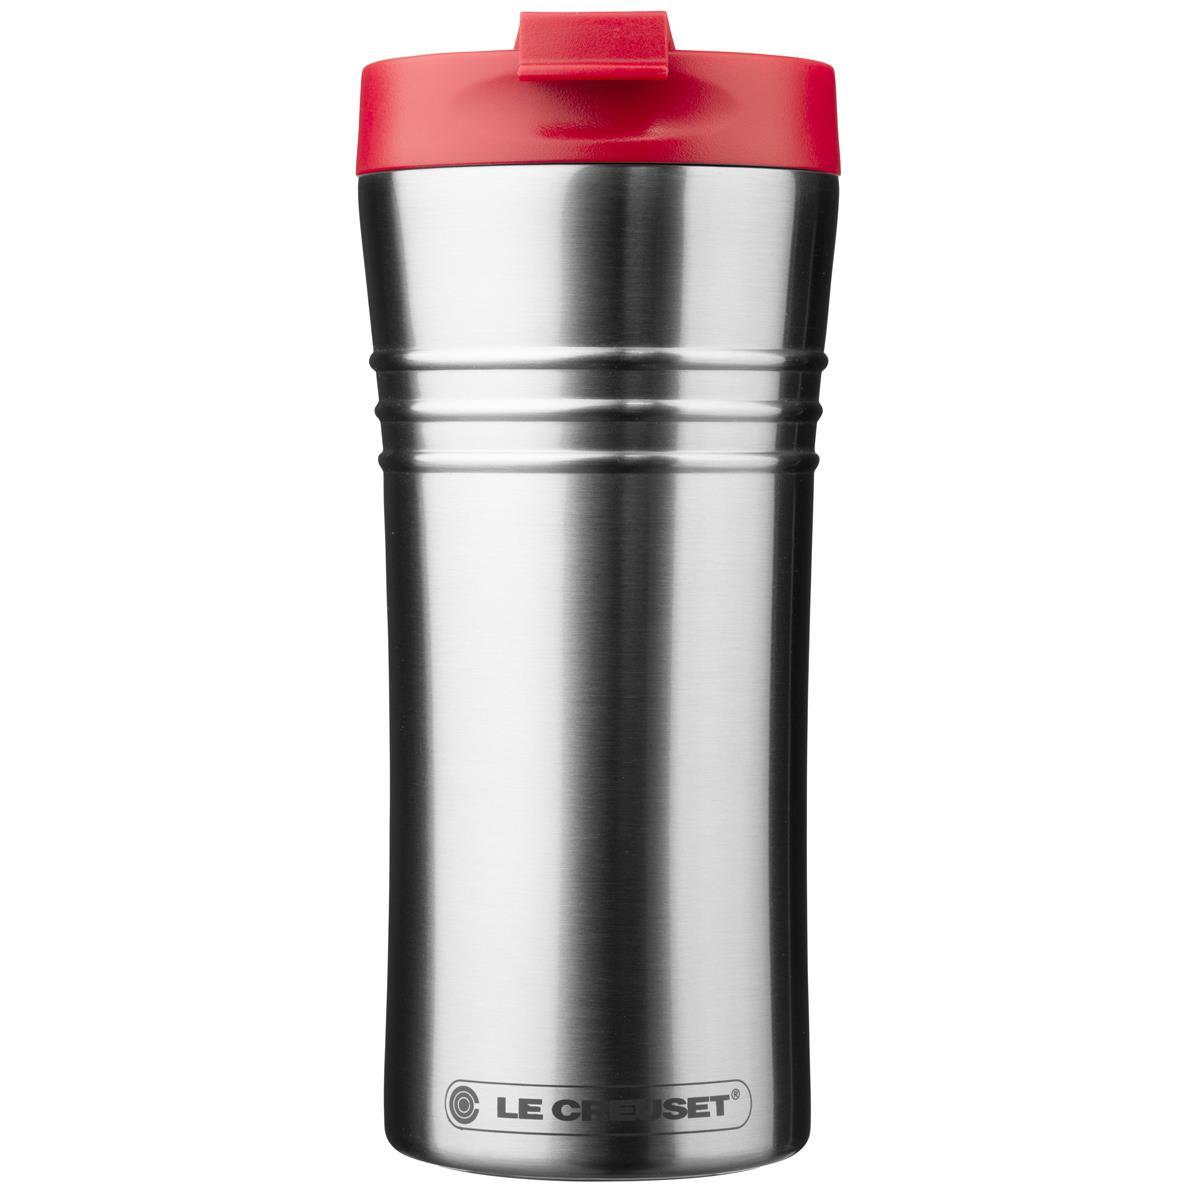 What is the guarantee for the Le Creuset Travel Mug?